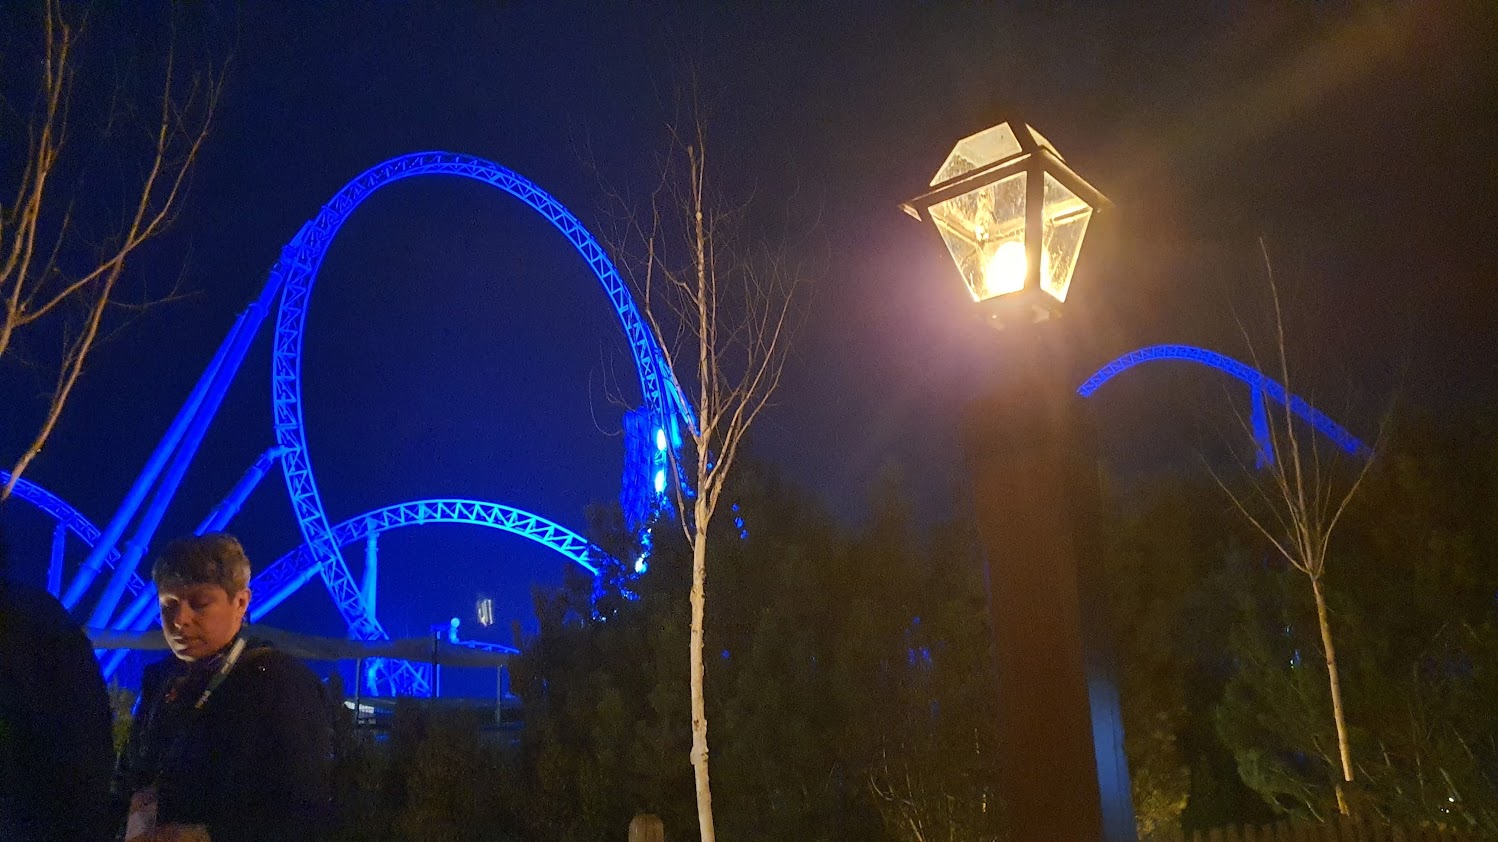 Blue Fire rollercoaster in Europa-Park, open to Hackathon participants thanks to Intel